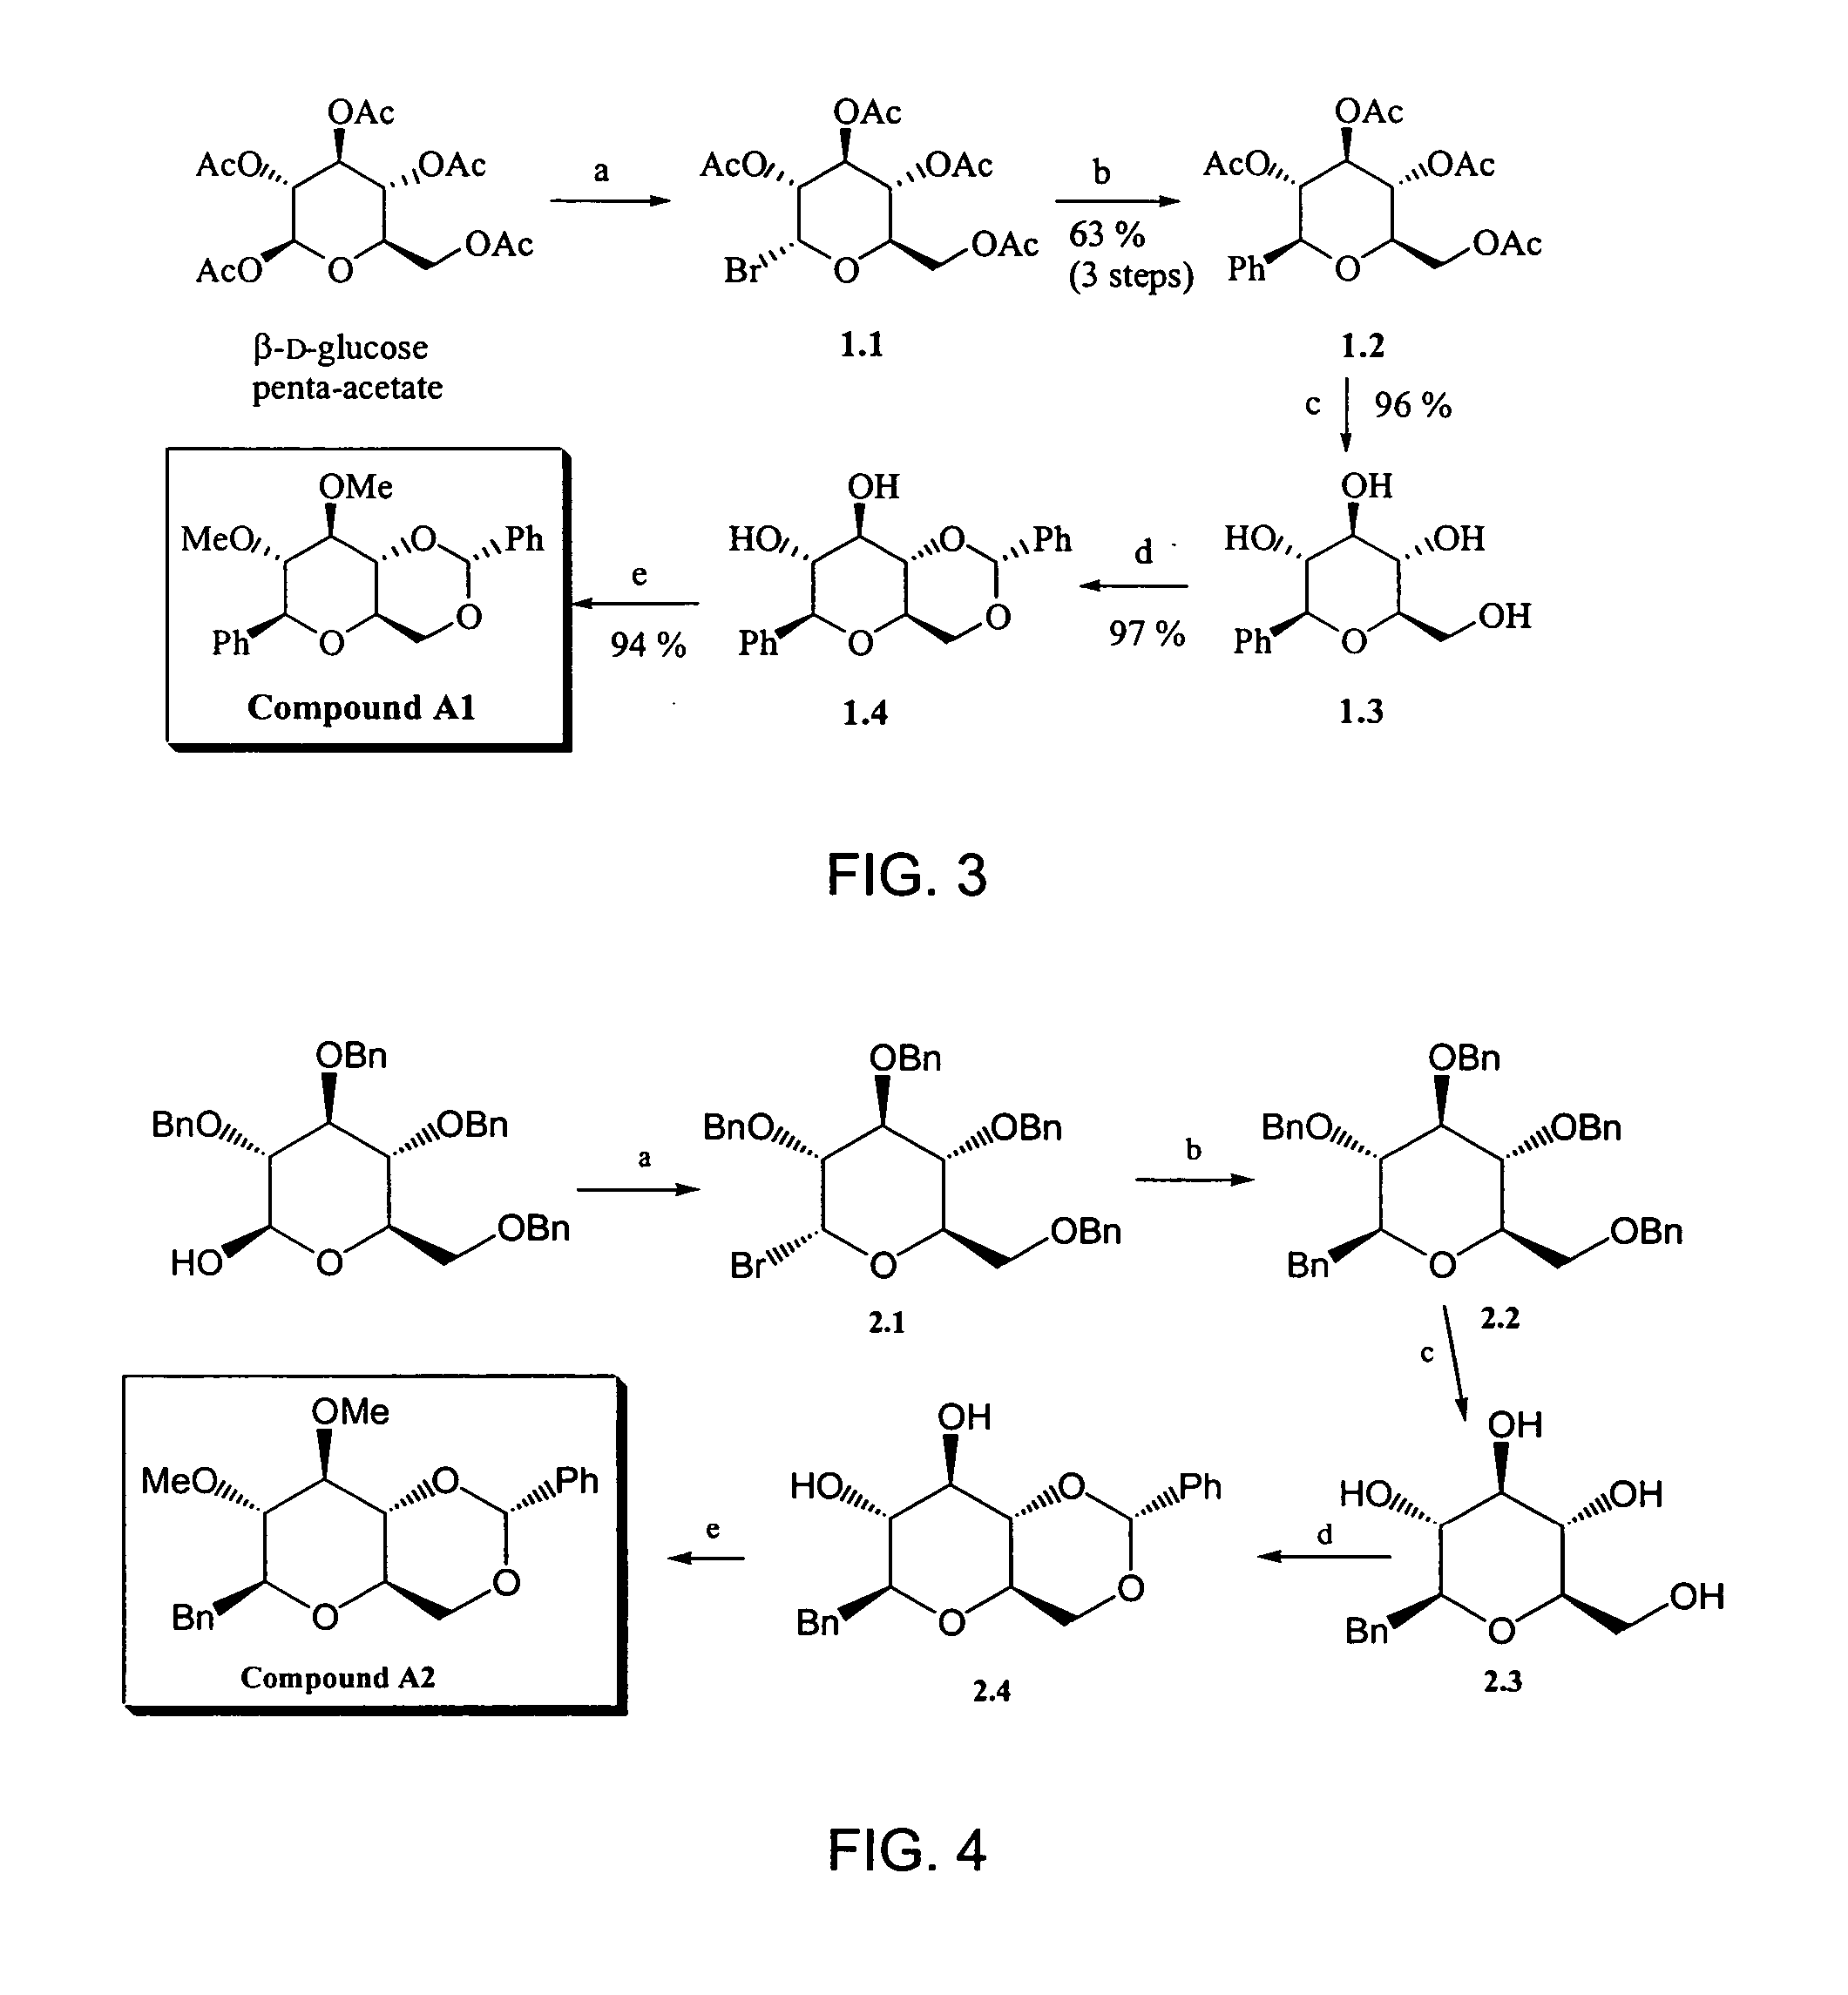 Bicyclic carbohydrate compounds useful in the treatment of infections caused by herpesviridae